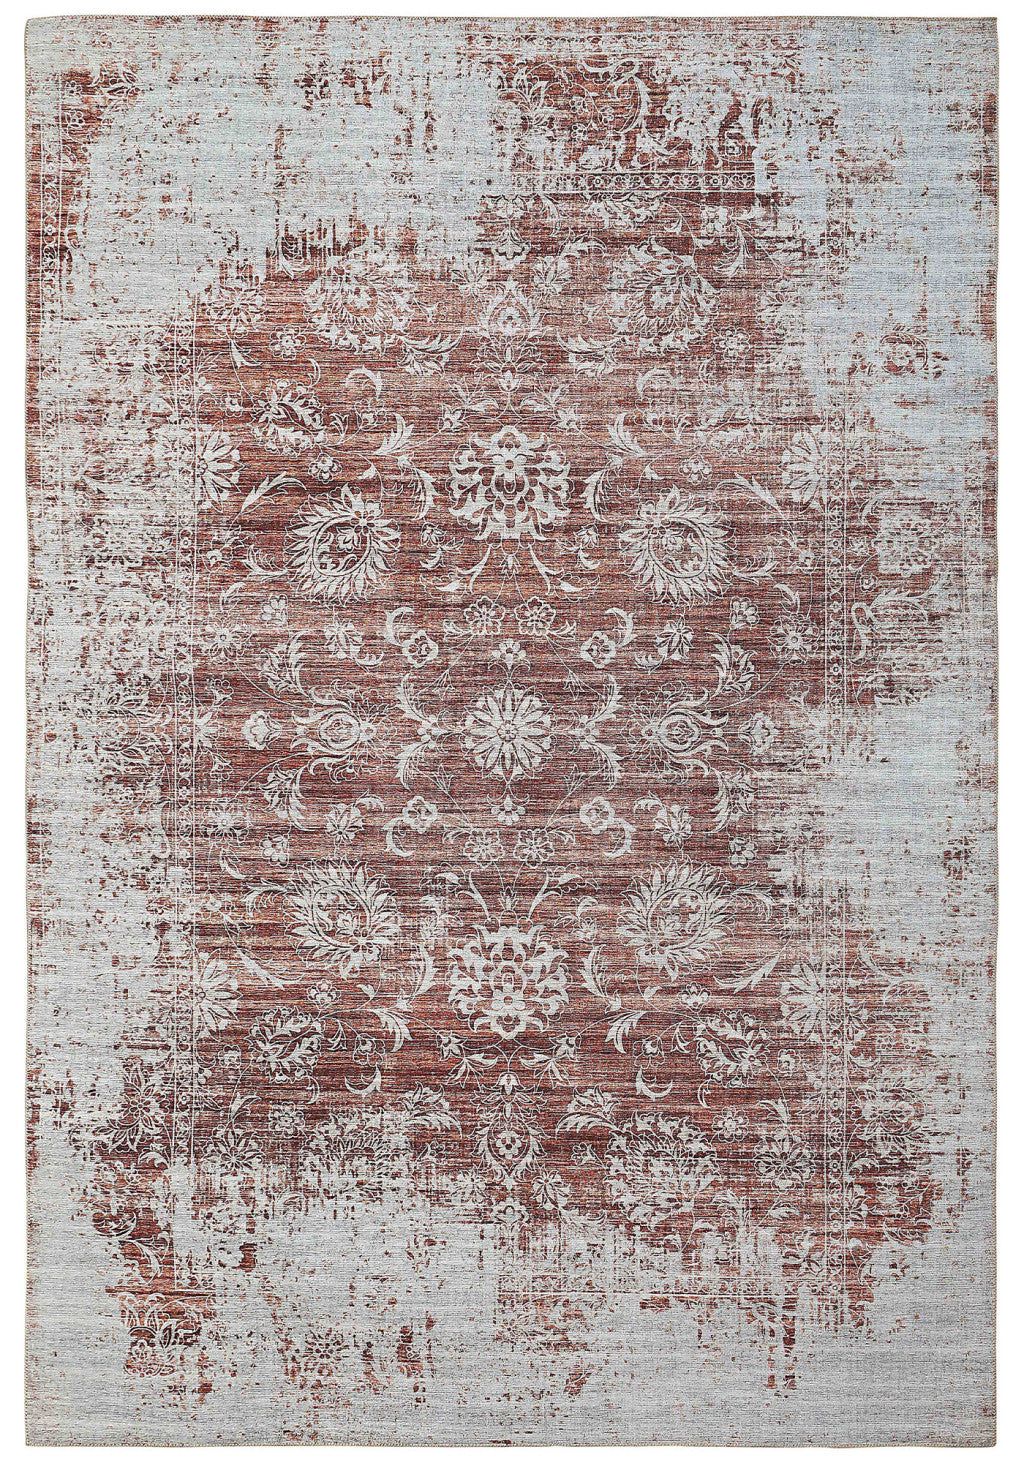 8' X 10' Rust Oriental Distressed Stain Resistant Area Rug